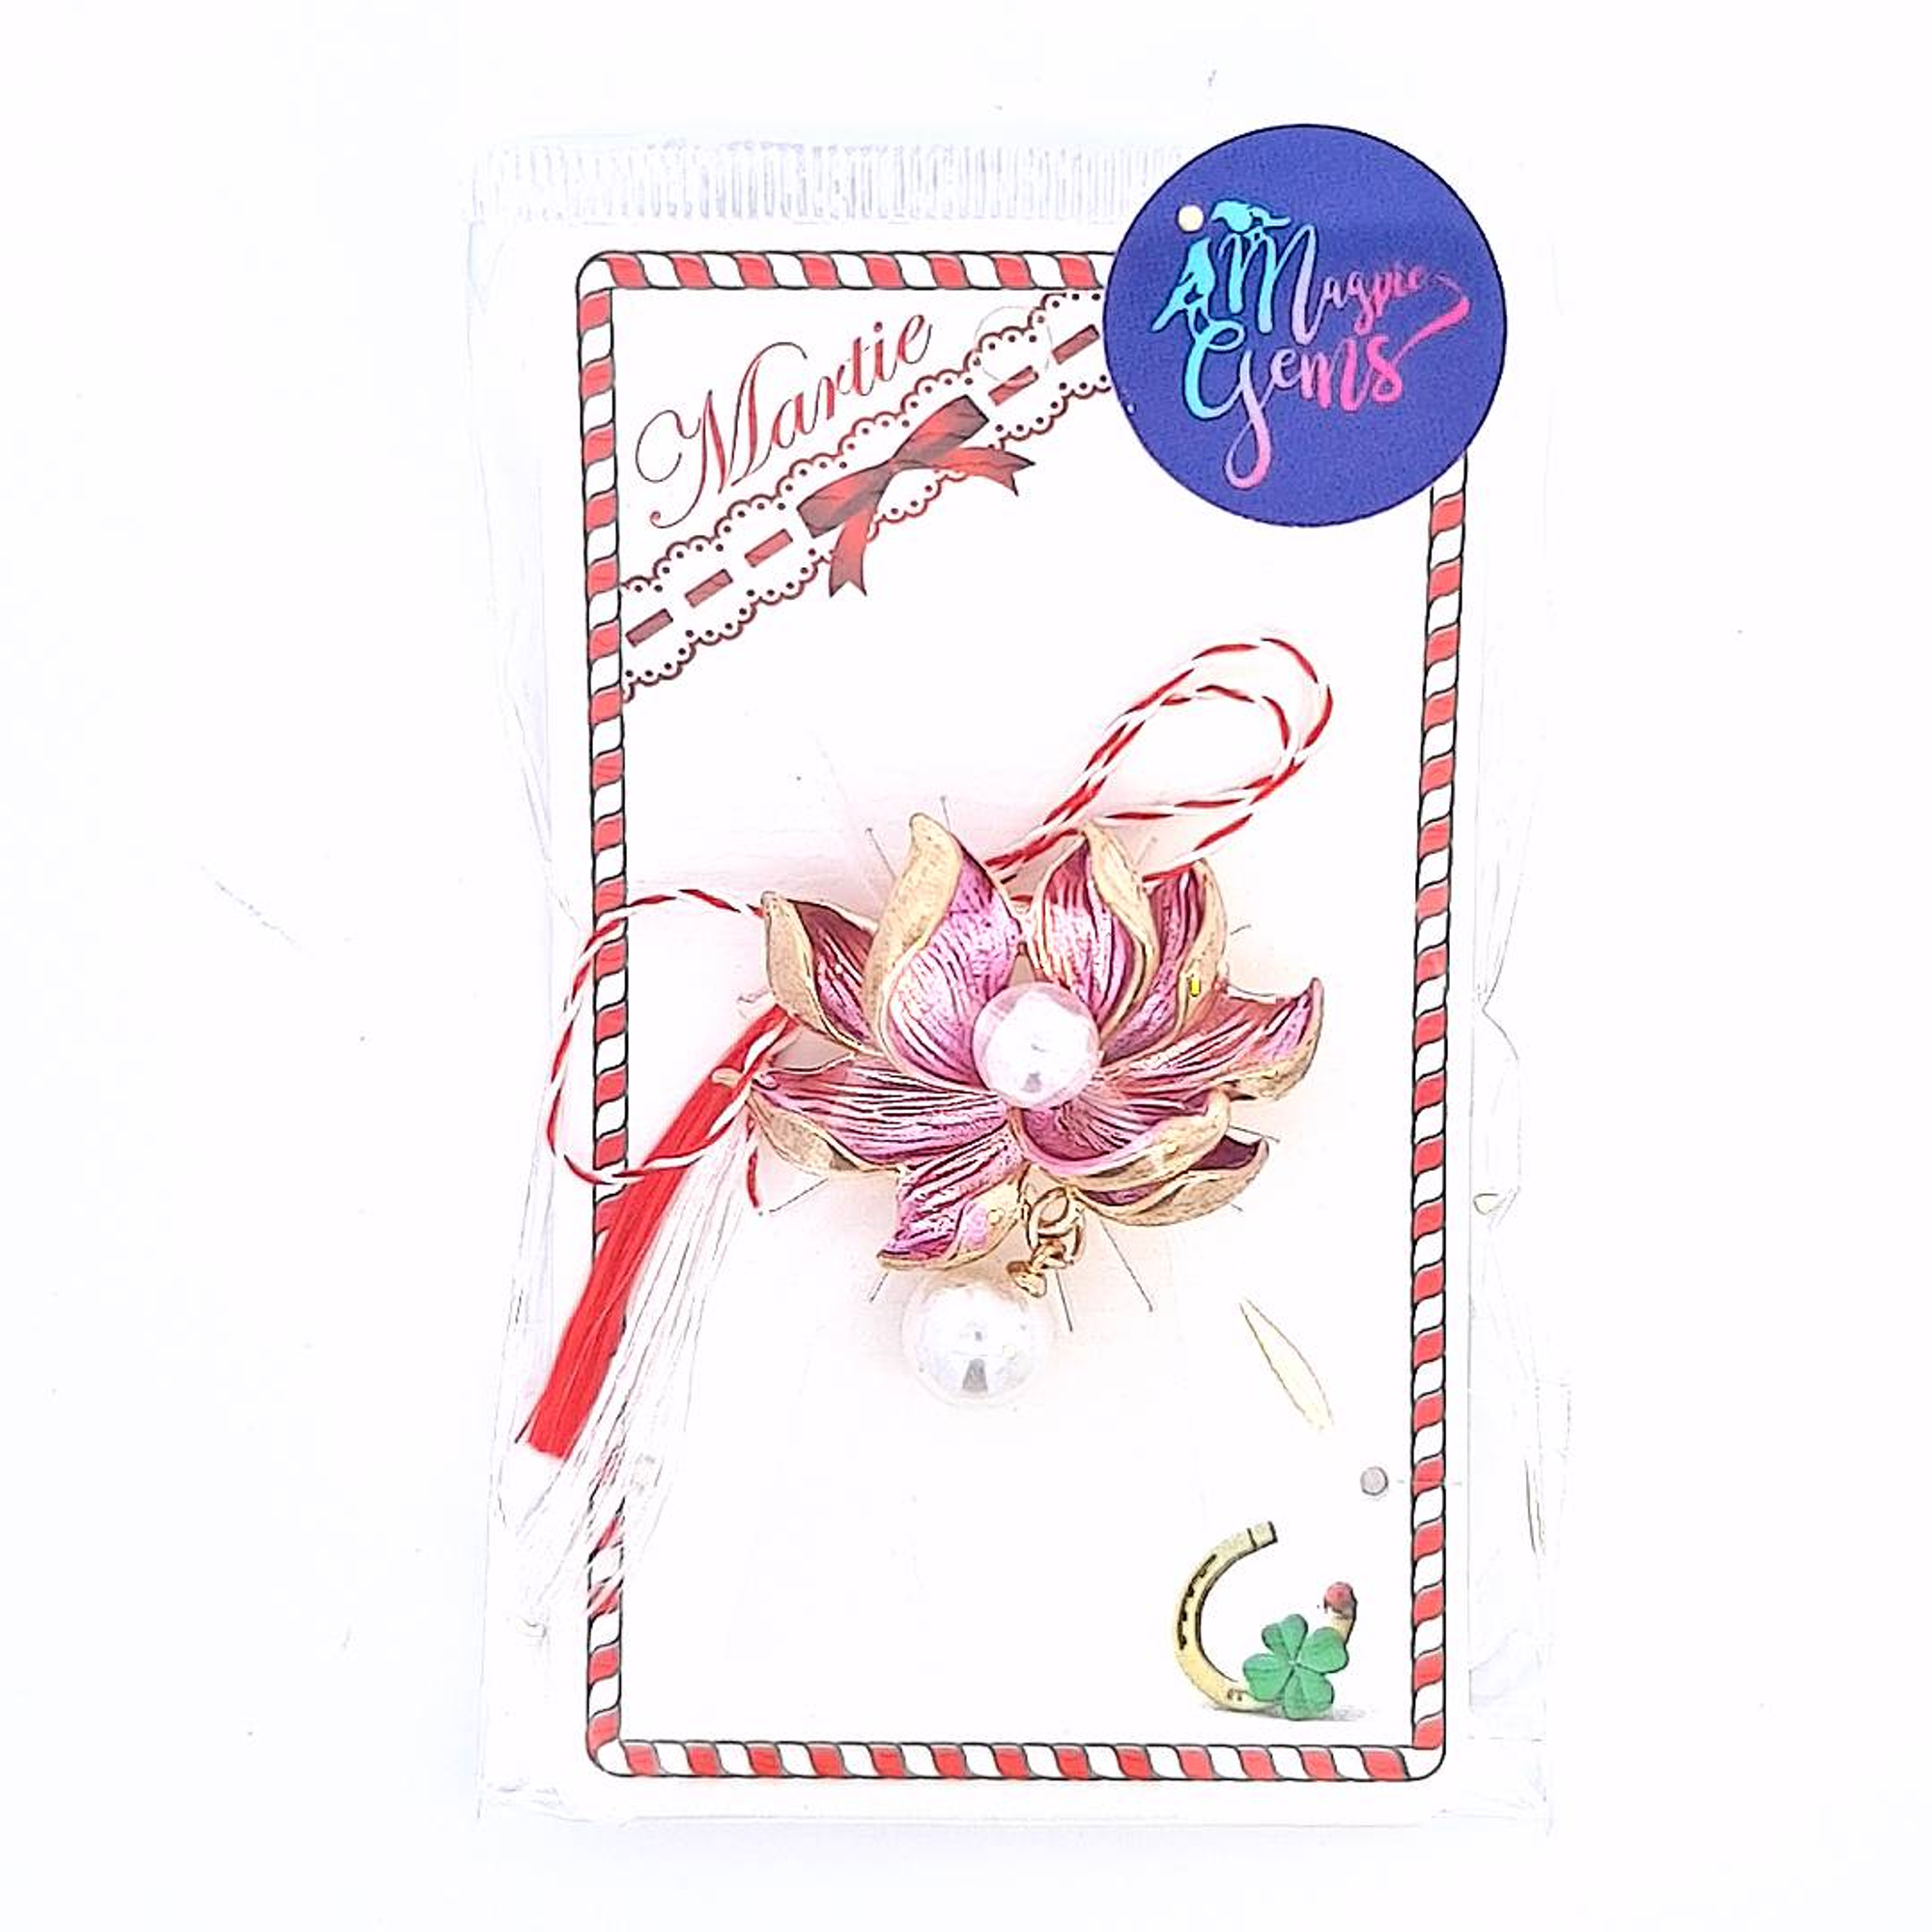 Elegantly packaged Blossom of Hope Mărțișor Brooch with red and white string, ready to be gifted as a cherished symbol of hope and new beginnings."